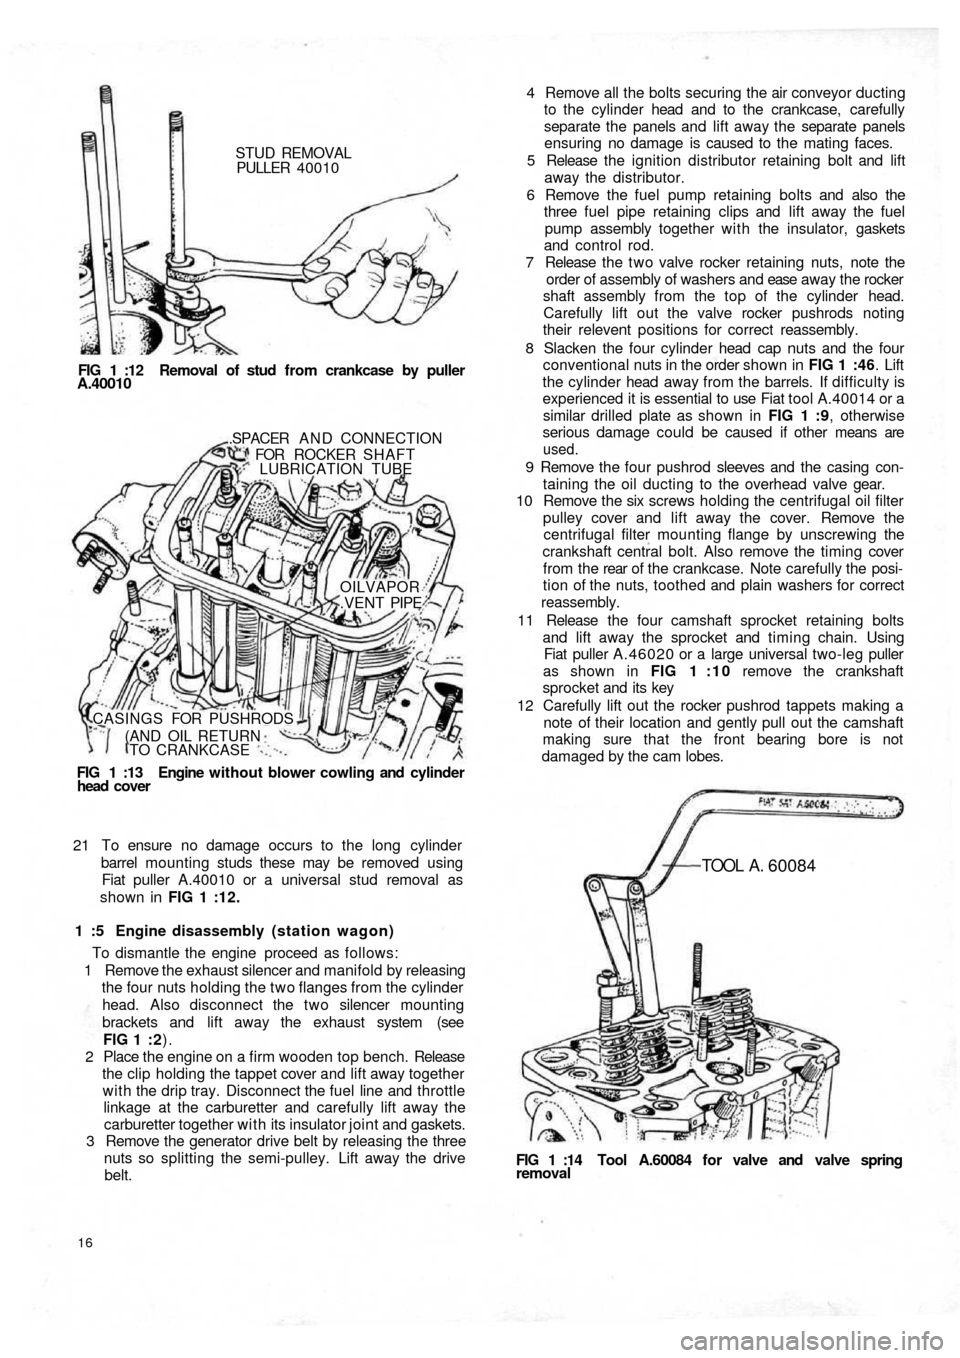 FIAT 500 1969 1.G Workshop Manual STUD REMOVAL
PULLER  40010
FIG 1 :12  Removal of stud from crankcase by puller
A.40010
FIG  1  :13   Engine  without blower cowling and cylinder
head  cover.SPACER  A N D  CONNECTION
FOR ROCKER SHAFT
